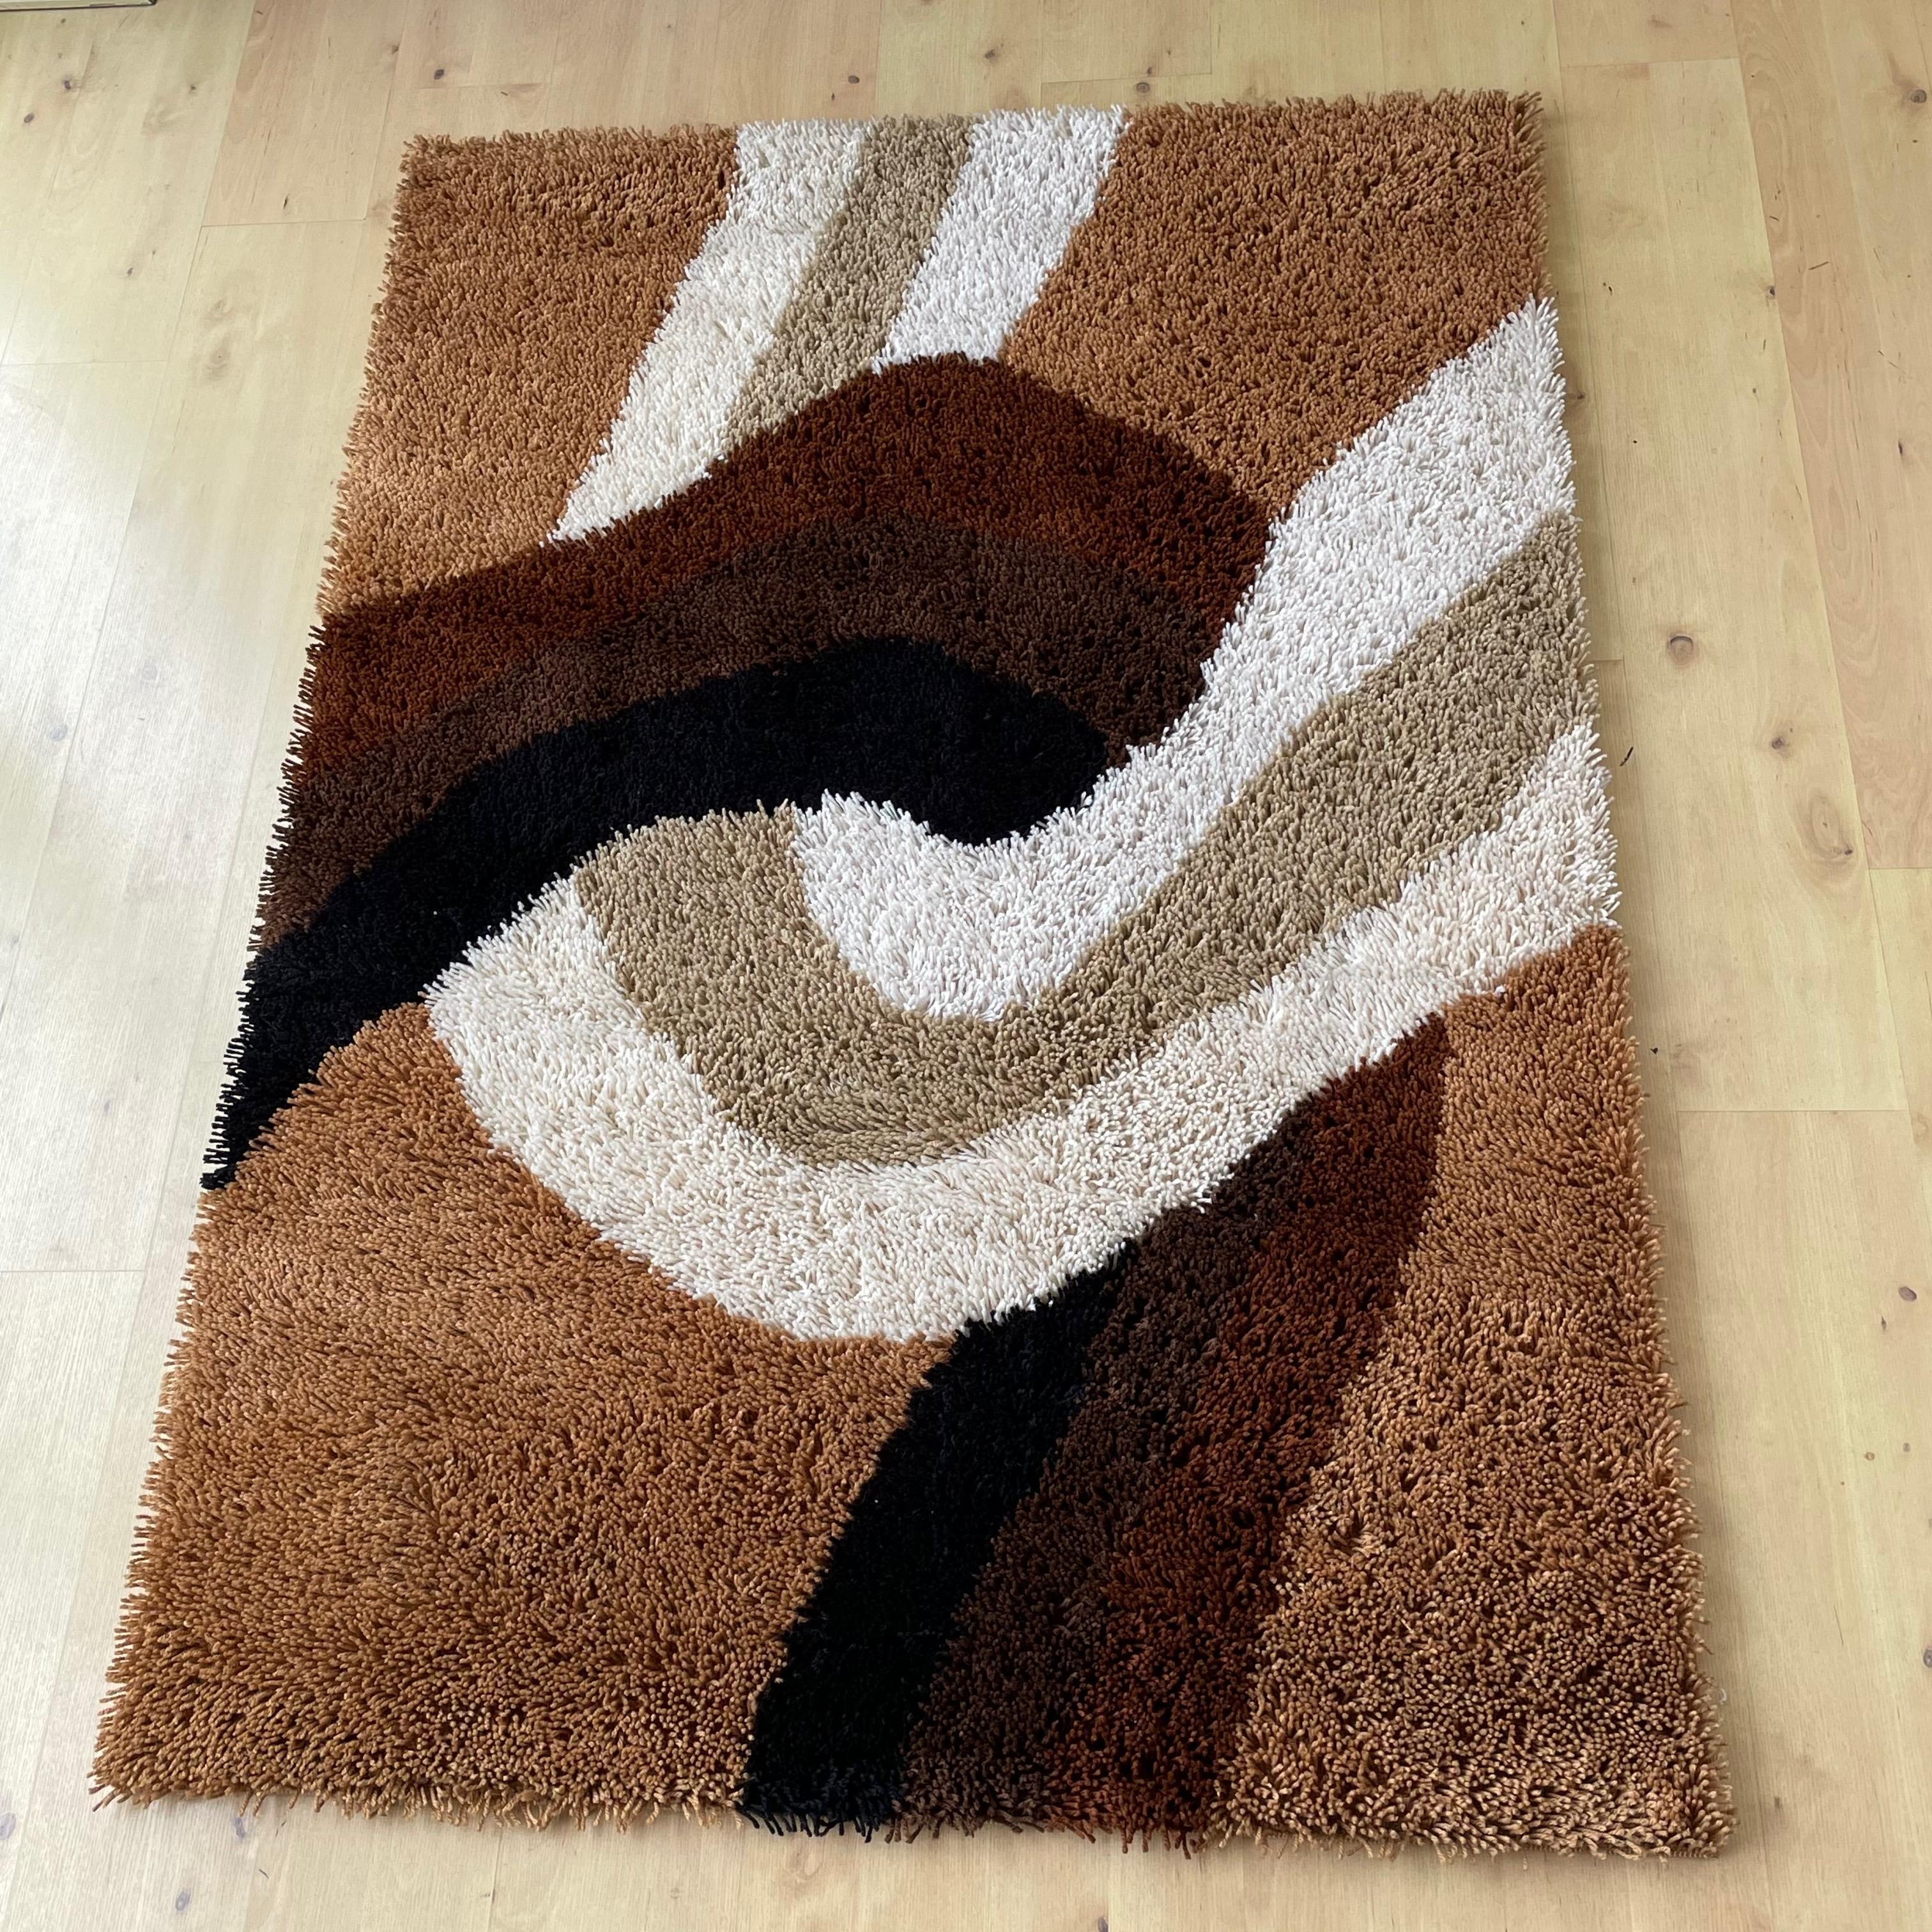 Article:

Original rya rug


Decade:

1970s


Origin:

USA - produced in Germany


Producer:

Concepts International 



Description:

This rug is a great example of 1970s pop art interior. Made in high quality rya weaving